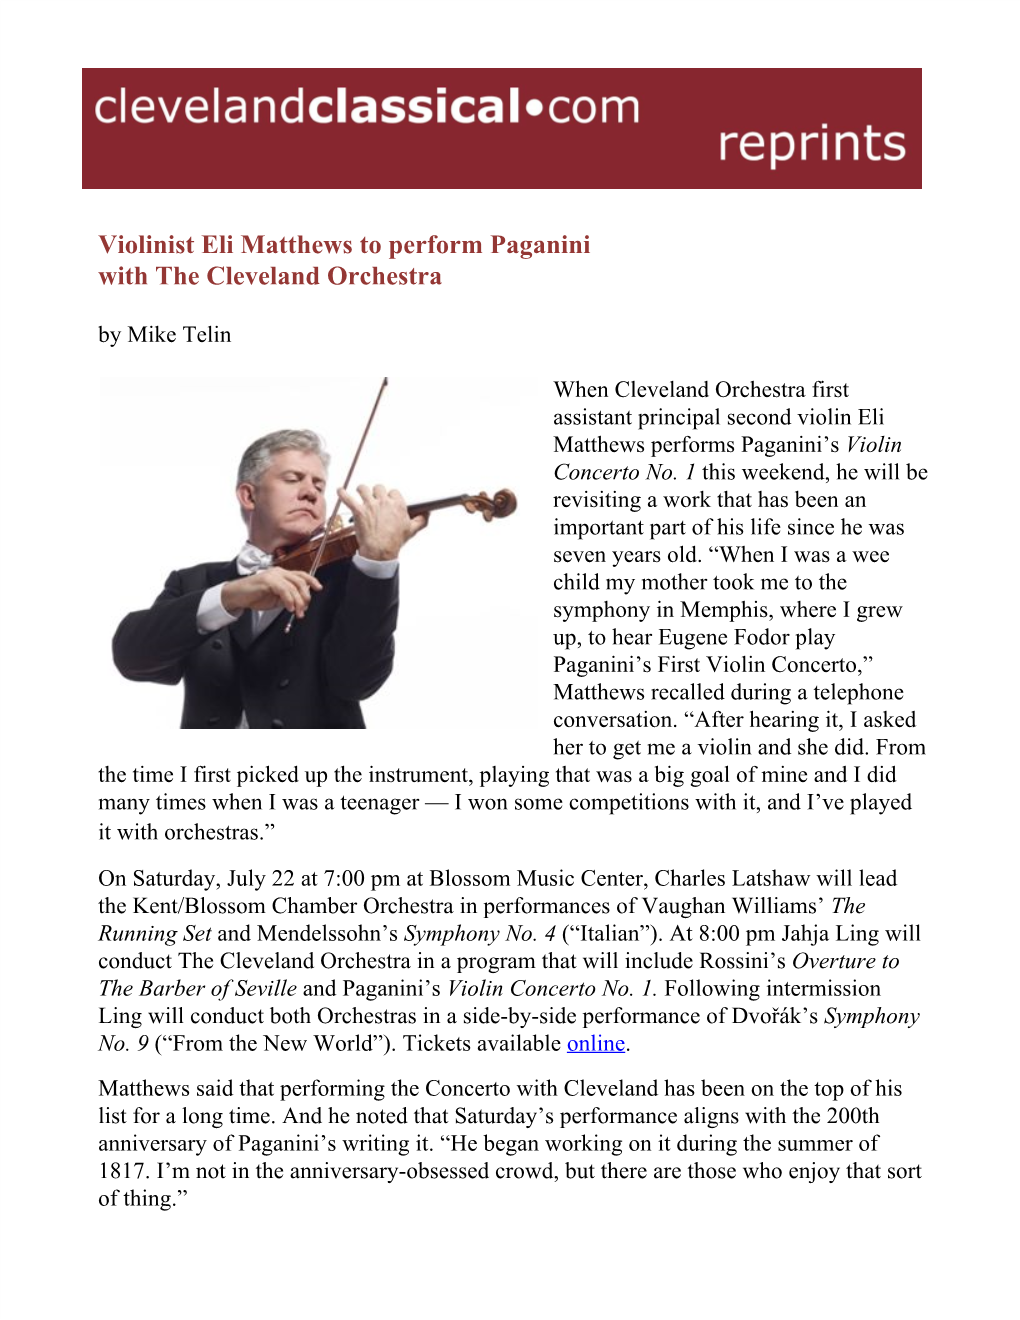 Violinist Eli Matthews to Perform Paganini with the Cleveland Orchestra by Mike Telin